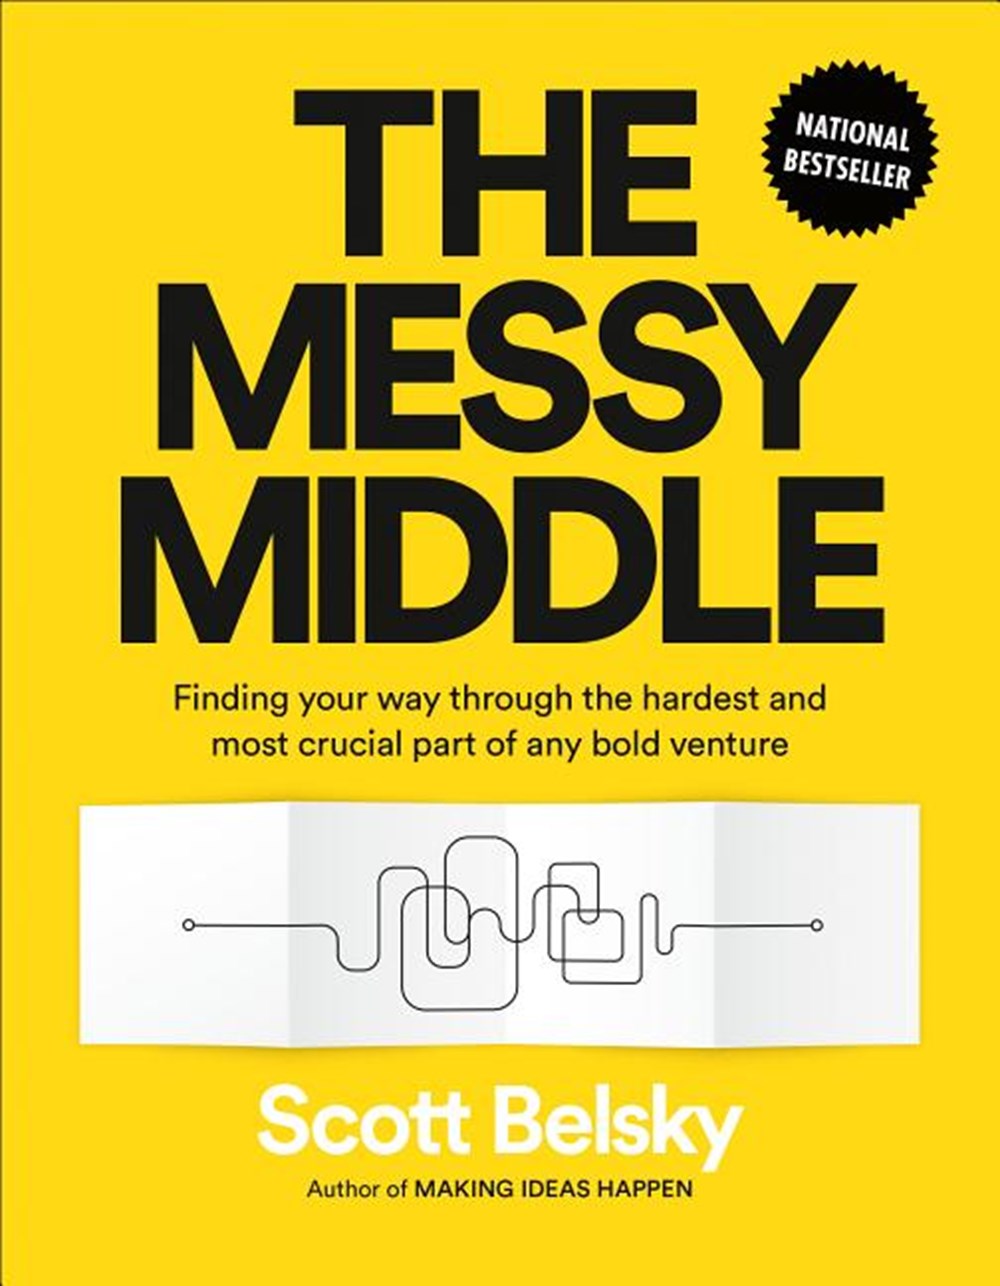 Messy Middle: Finding Your Way Through the Hardest and Most Crucial Part of Any Bold Venture